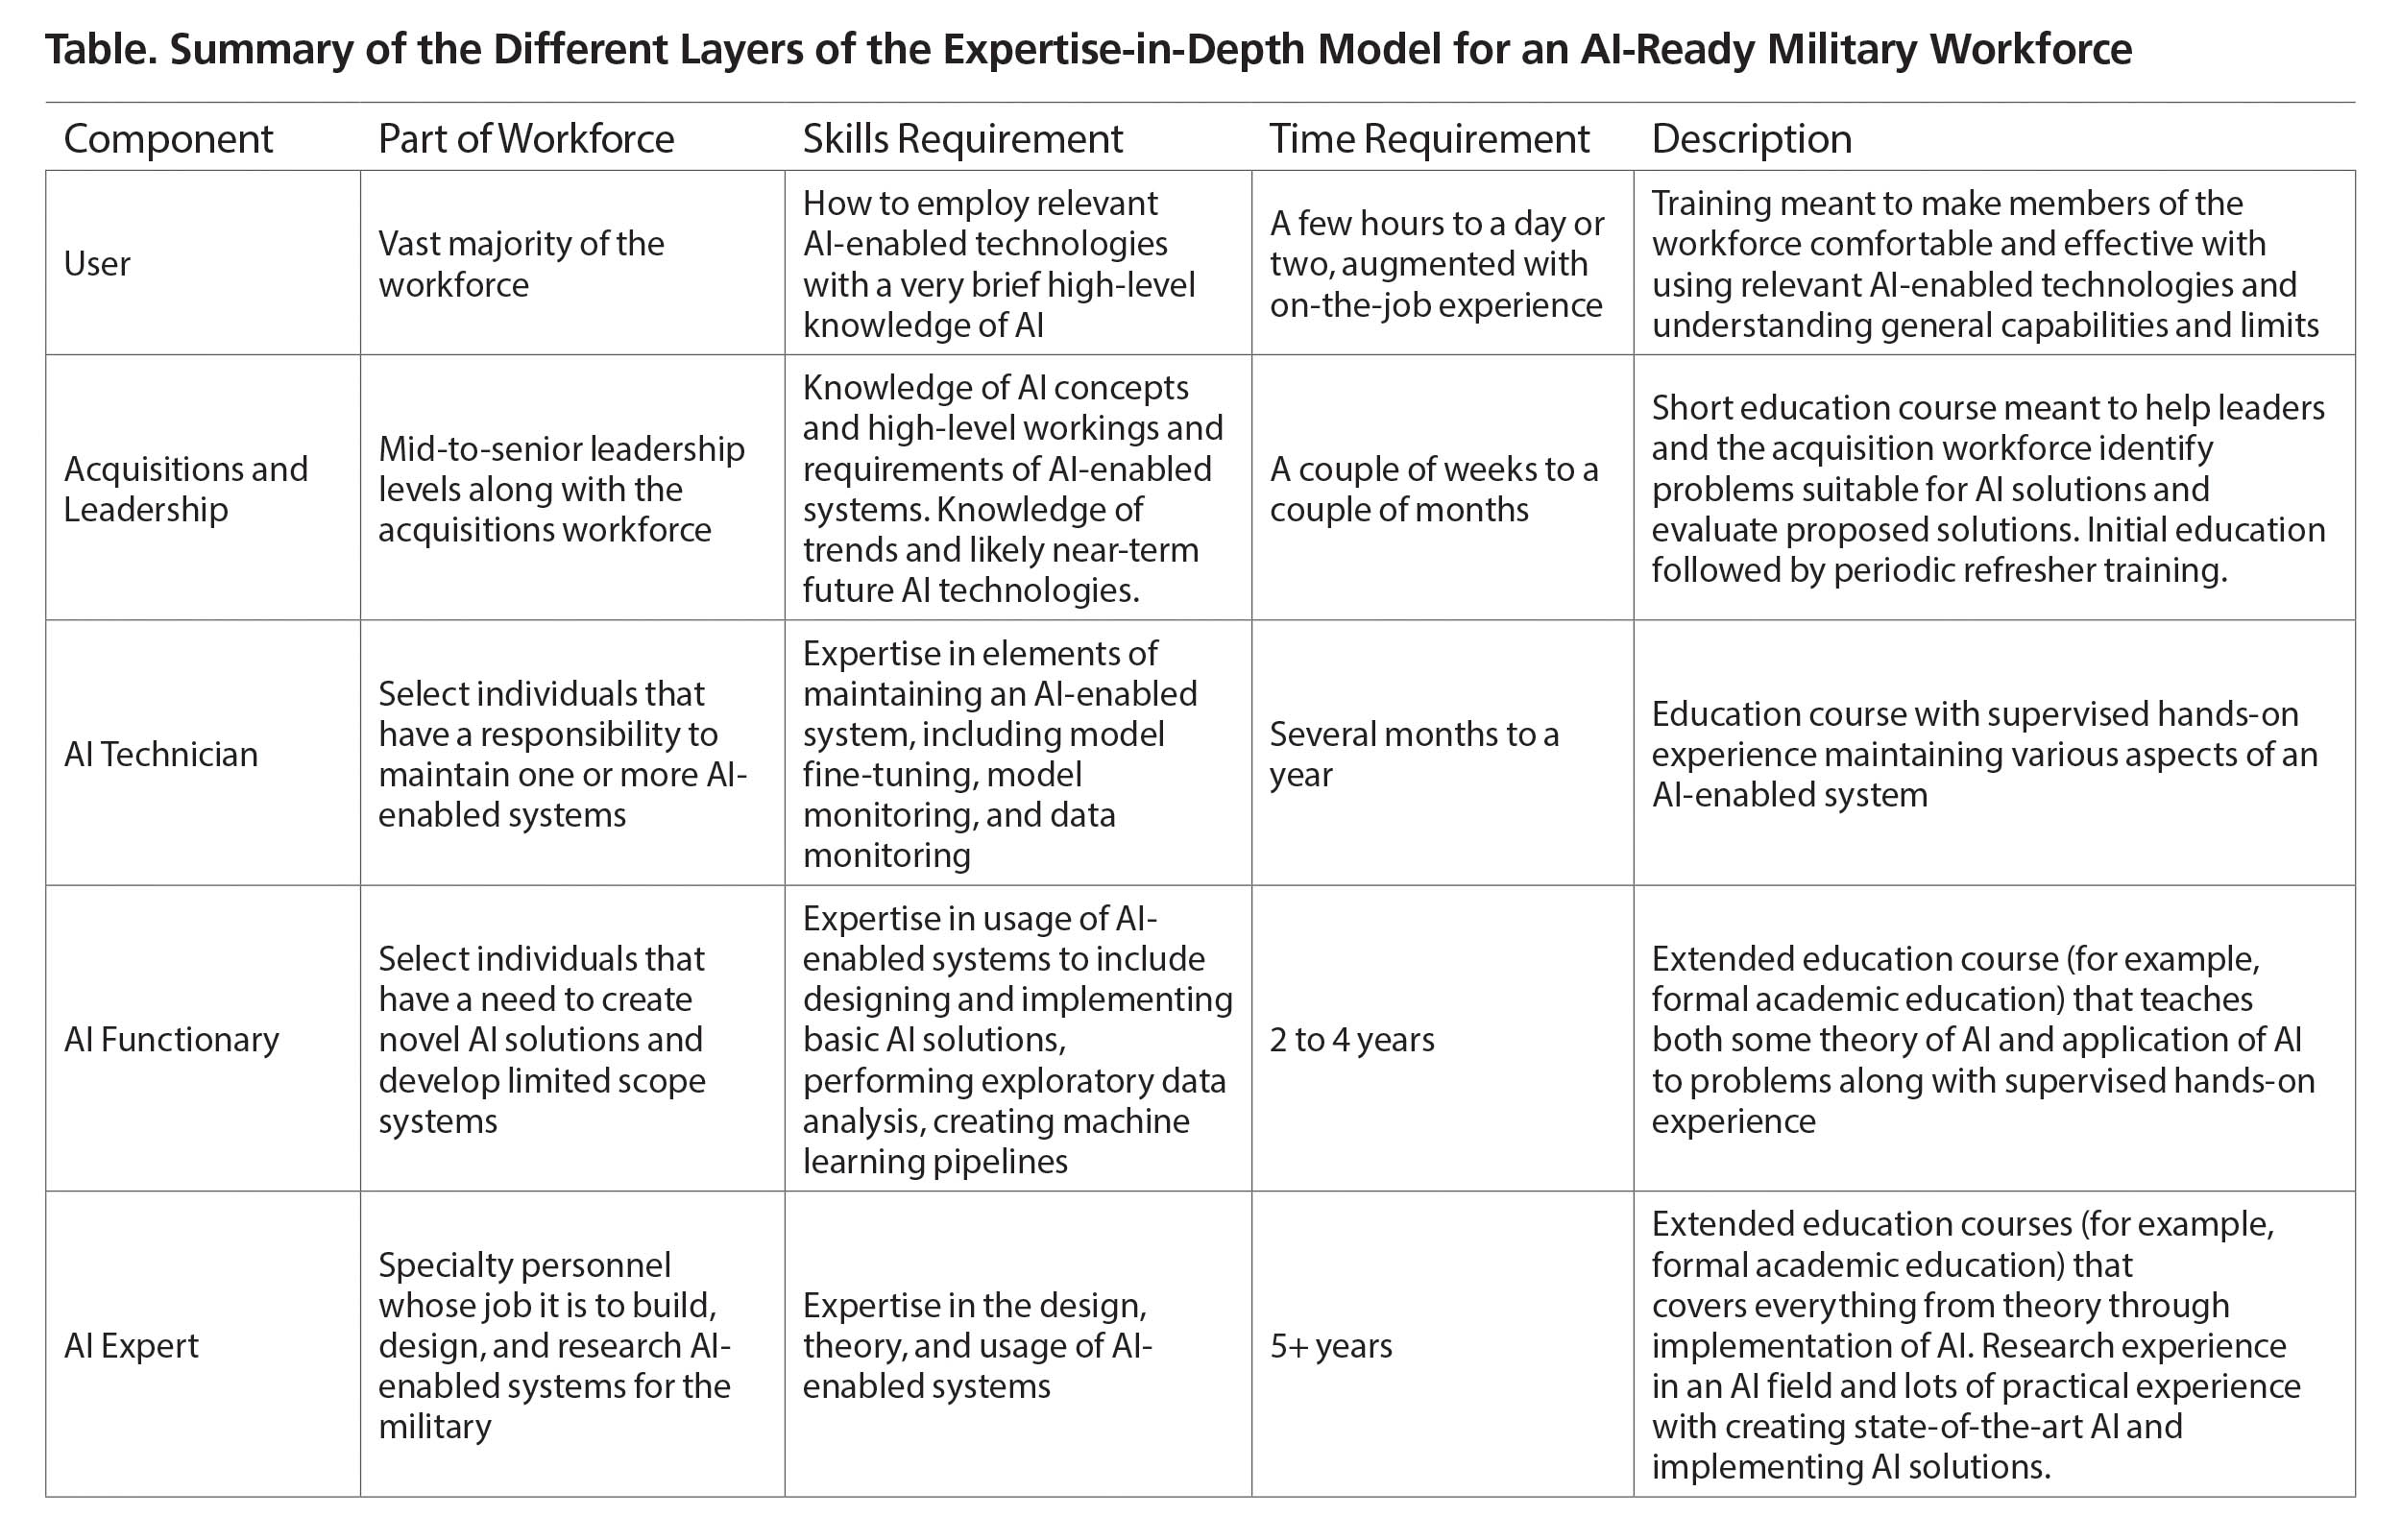 Table. Summary of the Different Layers of the Expertise-in-Depth Model for an AI-Ready Military Workforce